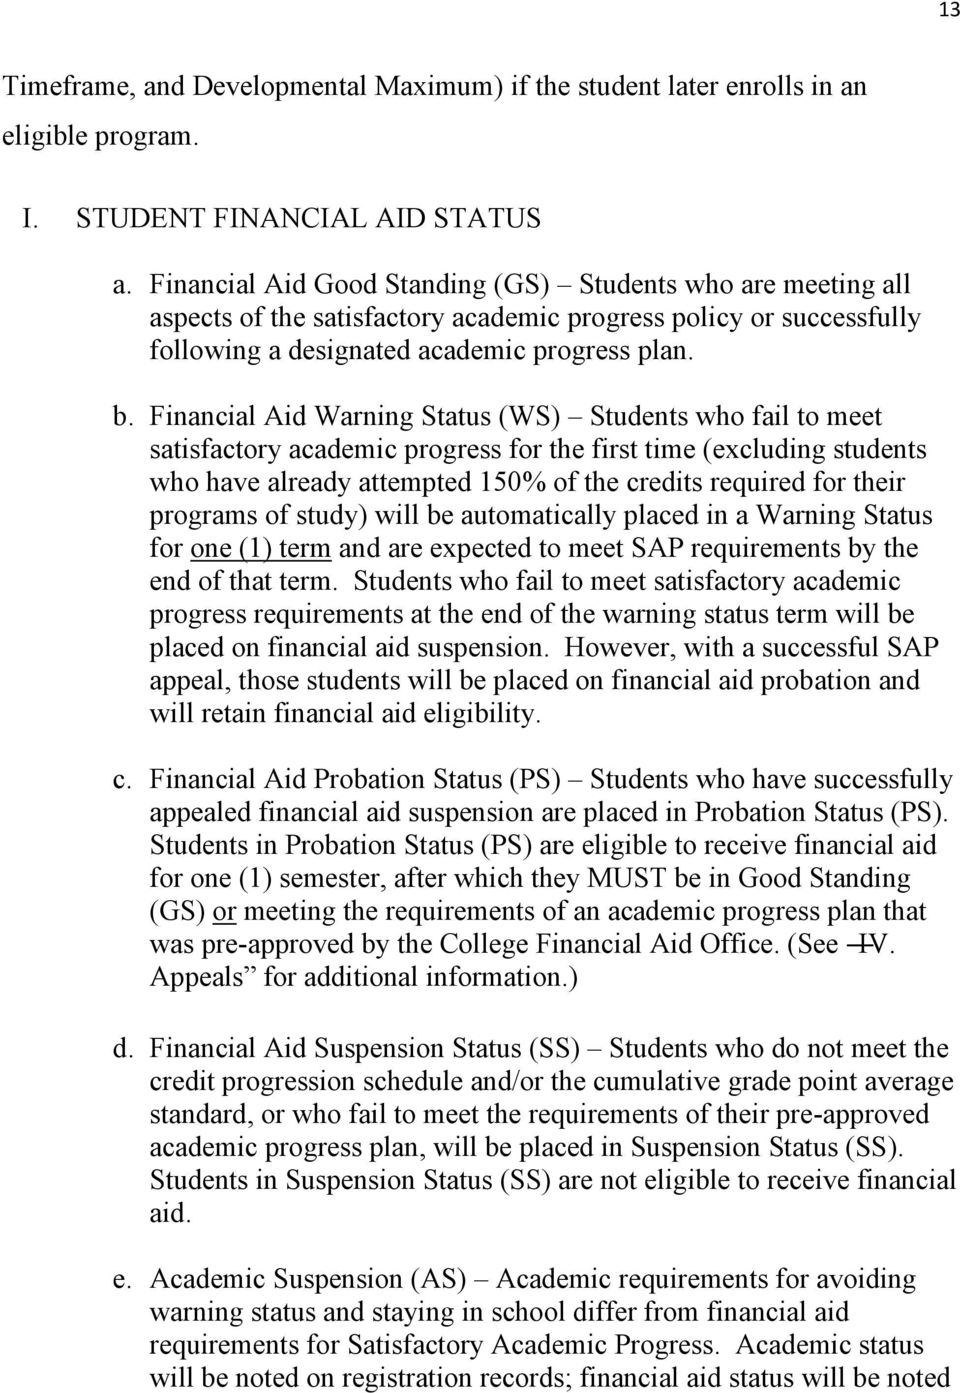 Financial Aid Warning Status (WS) Students who fail to meet satisfactory academic progress for the first time (excluding students who have already attempted 150% of the credits required for their